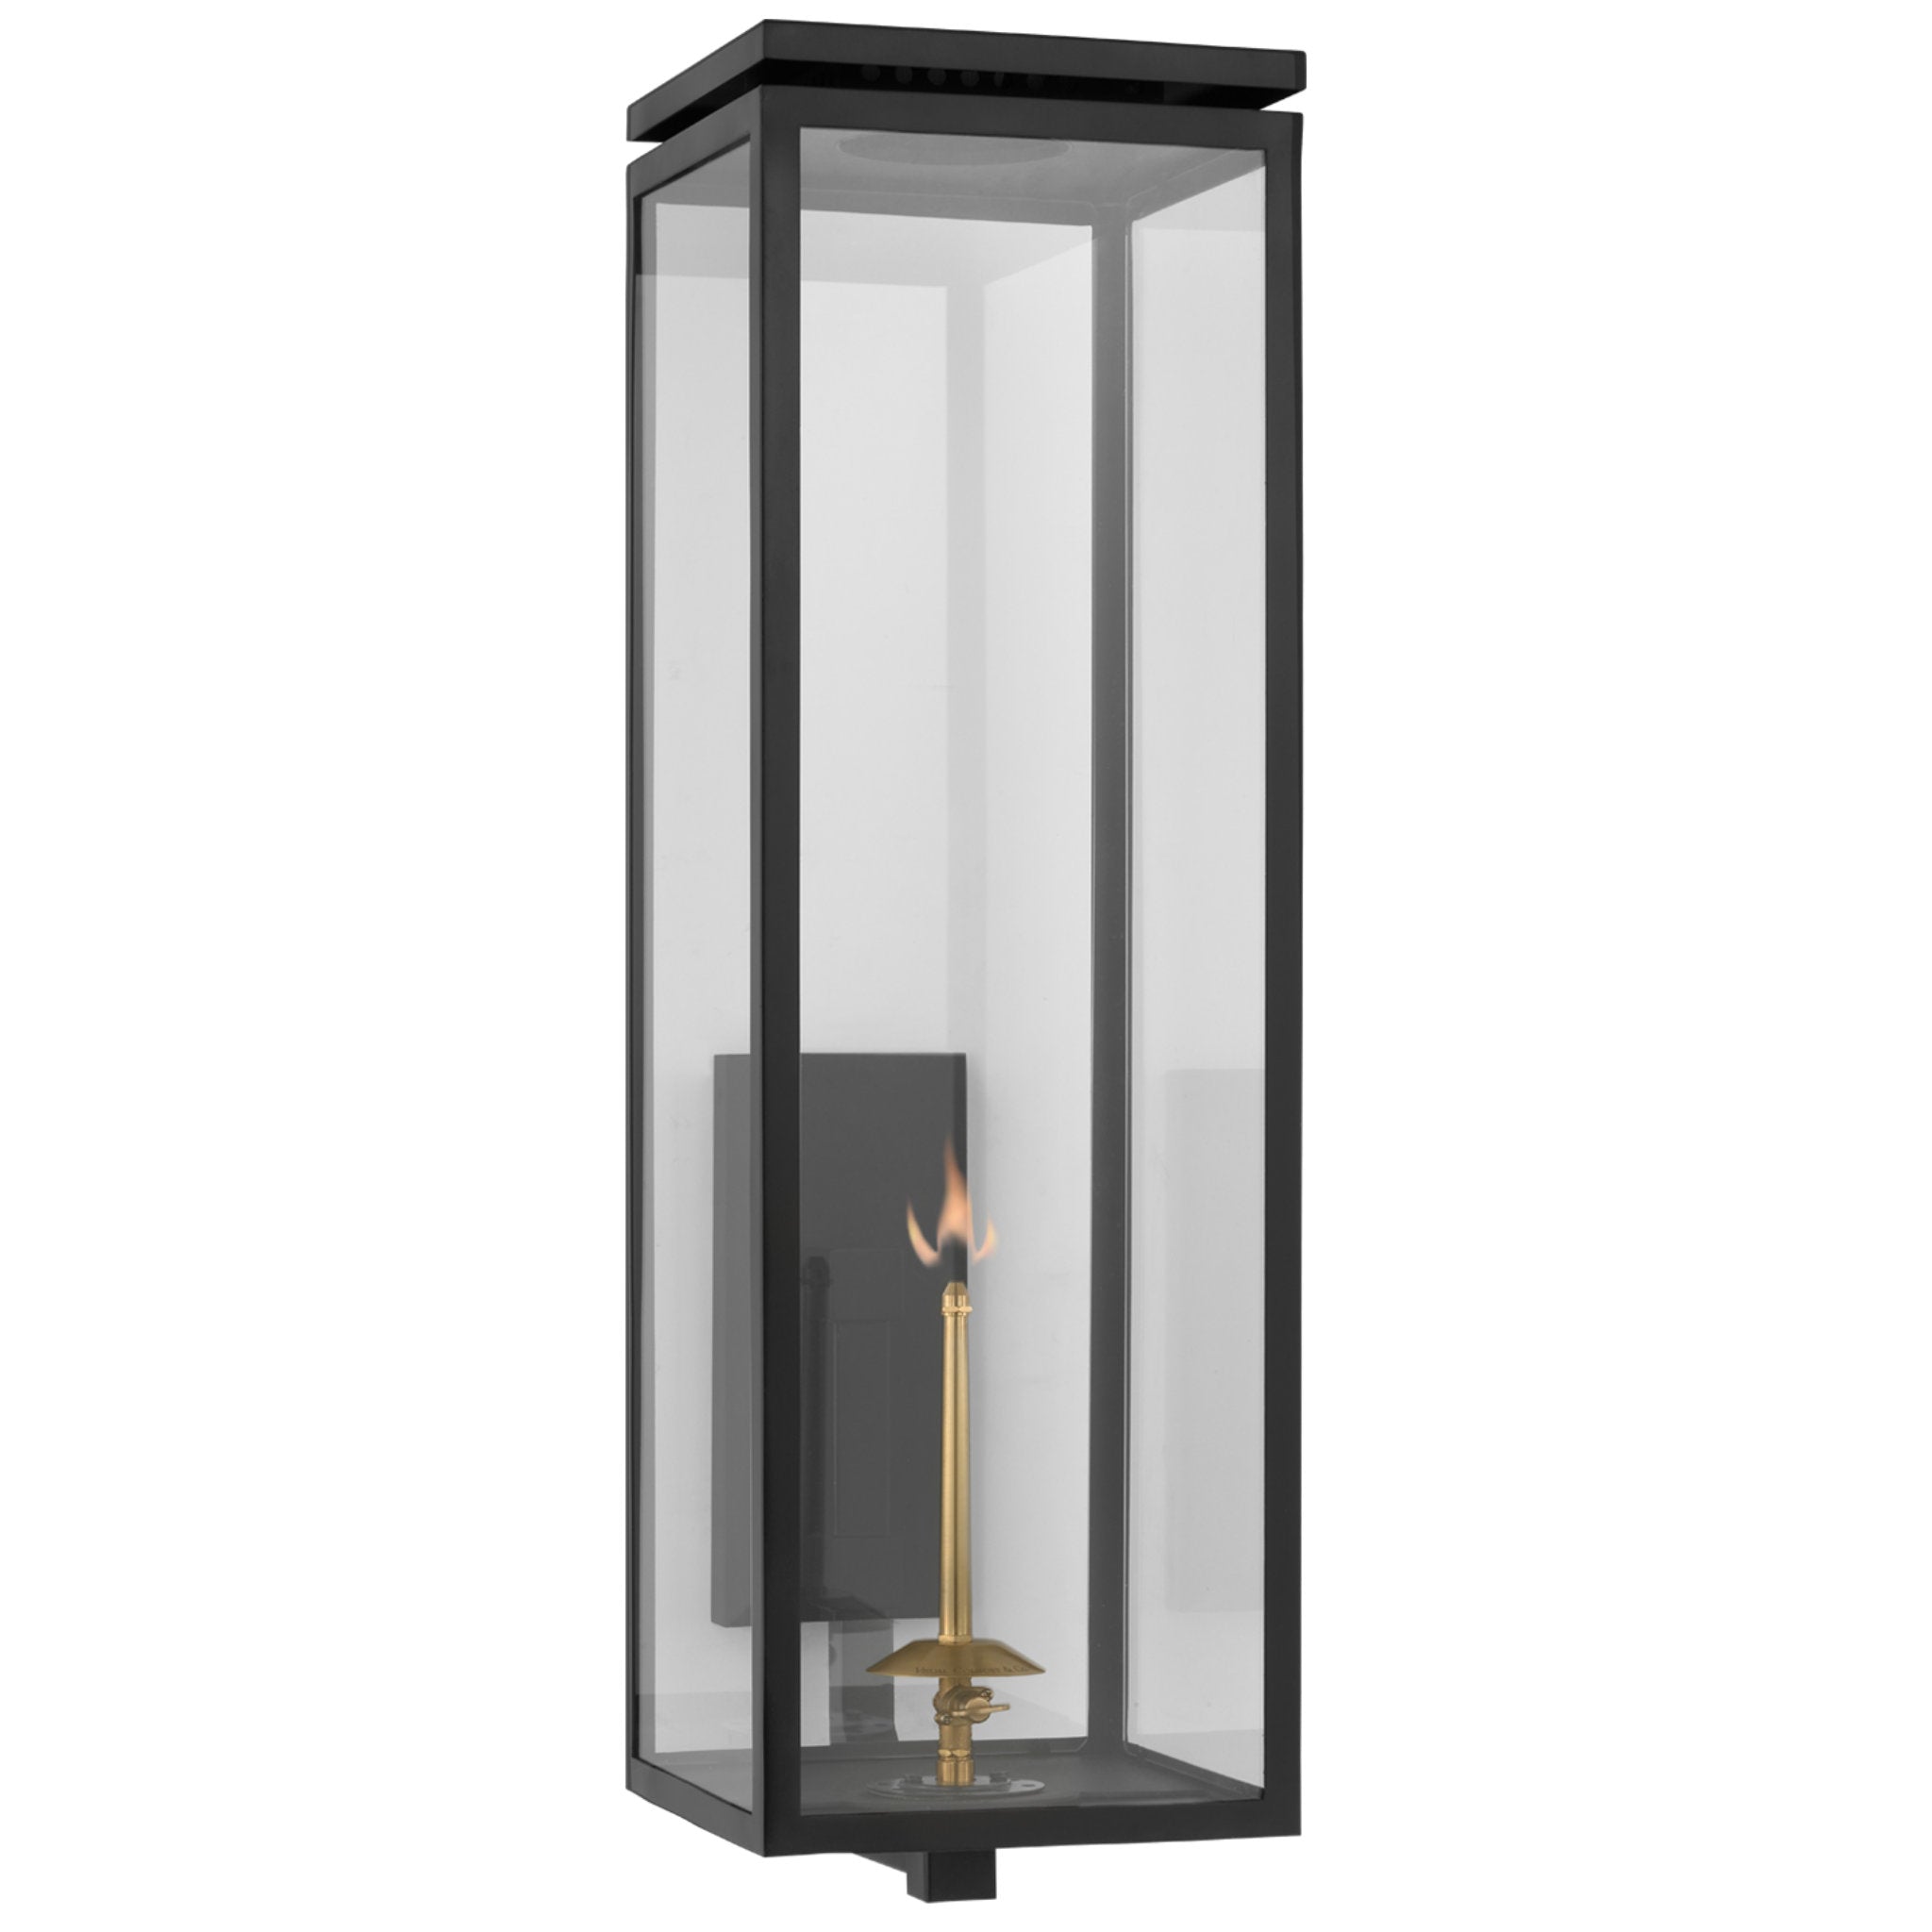 Chapman & Myers Fresno Grande Bracketed Gas Wall Lantern in Matte Black with Clear Glass